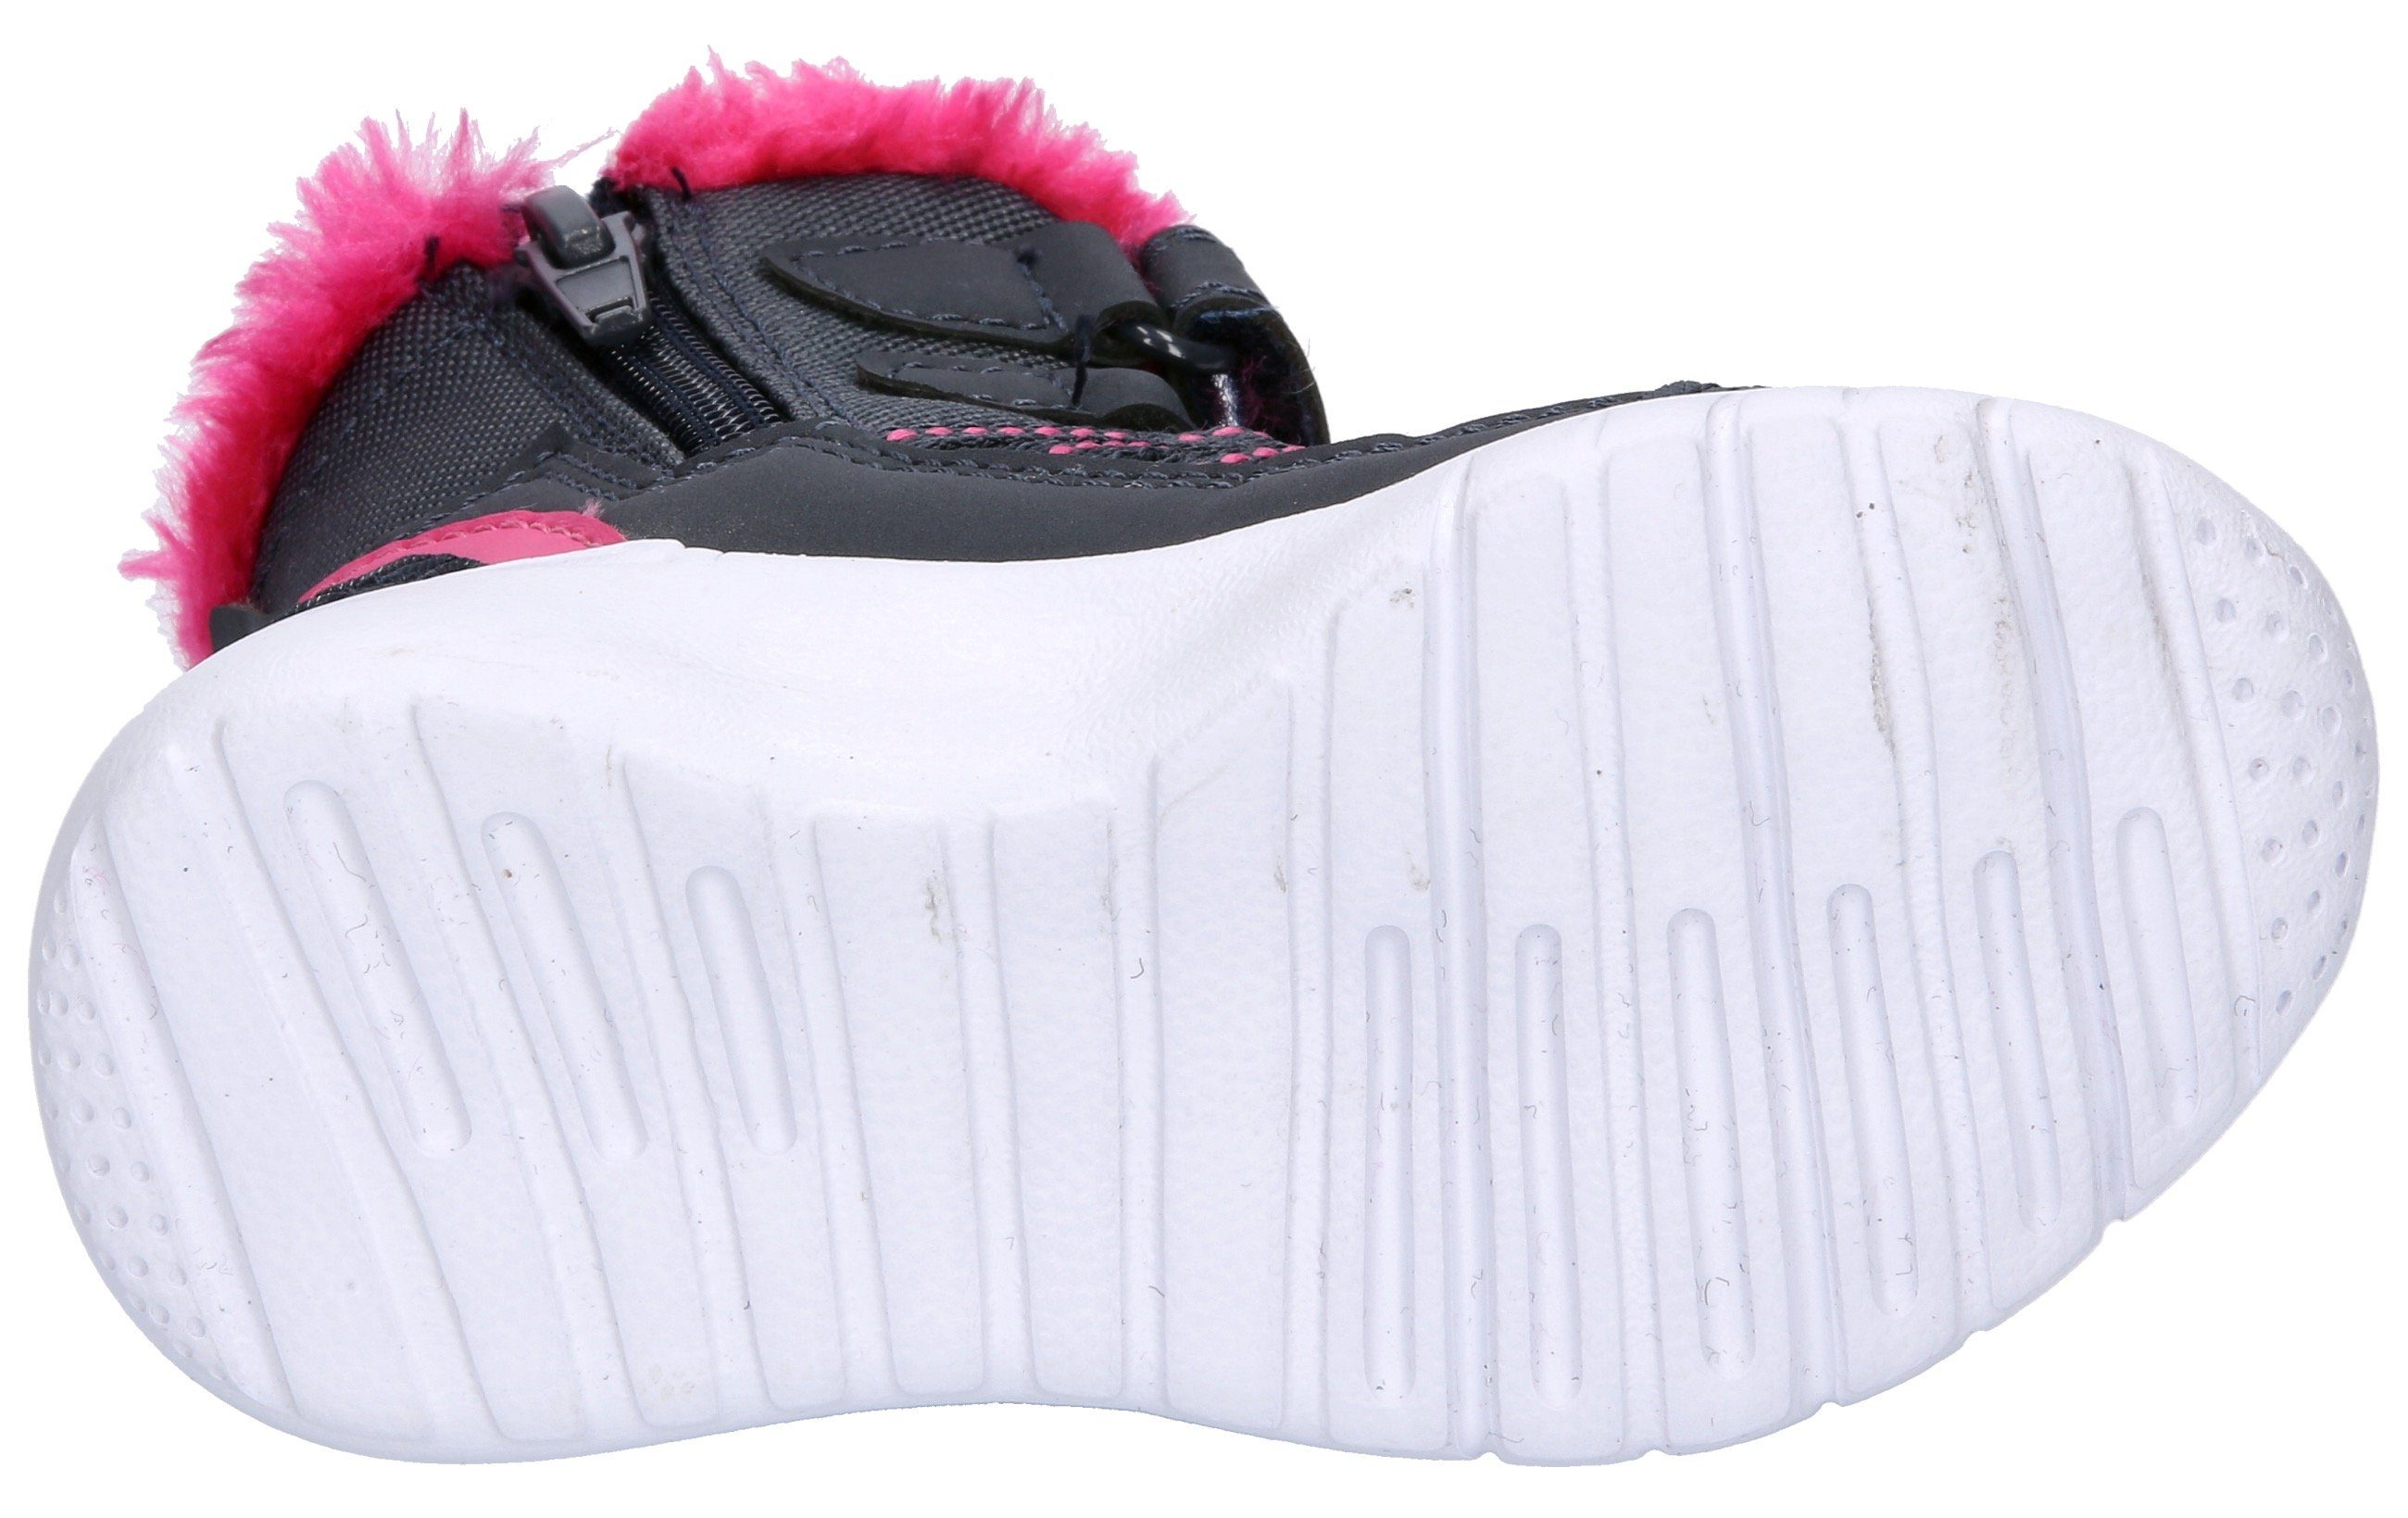 Warmfutter Lico mit Winterboots navy-pink Shalby